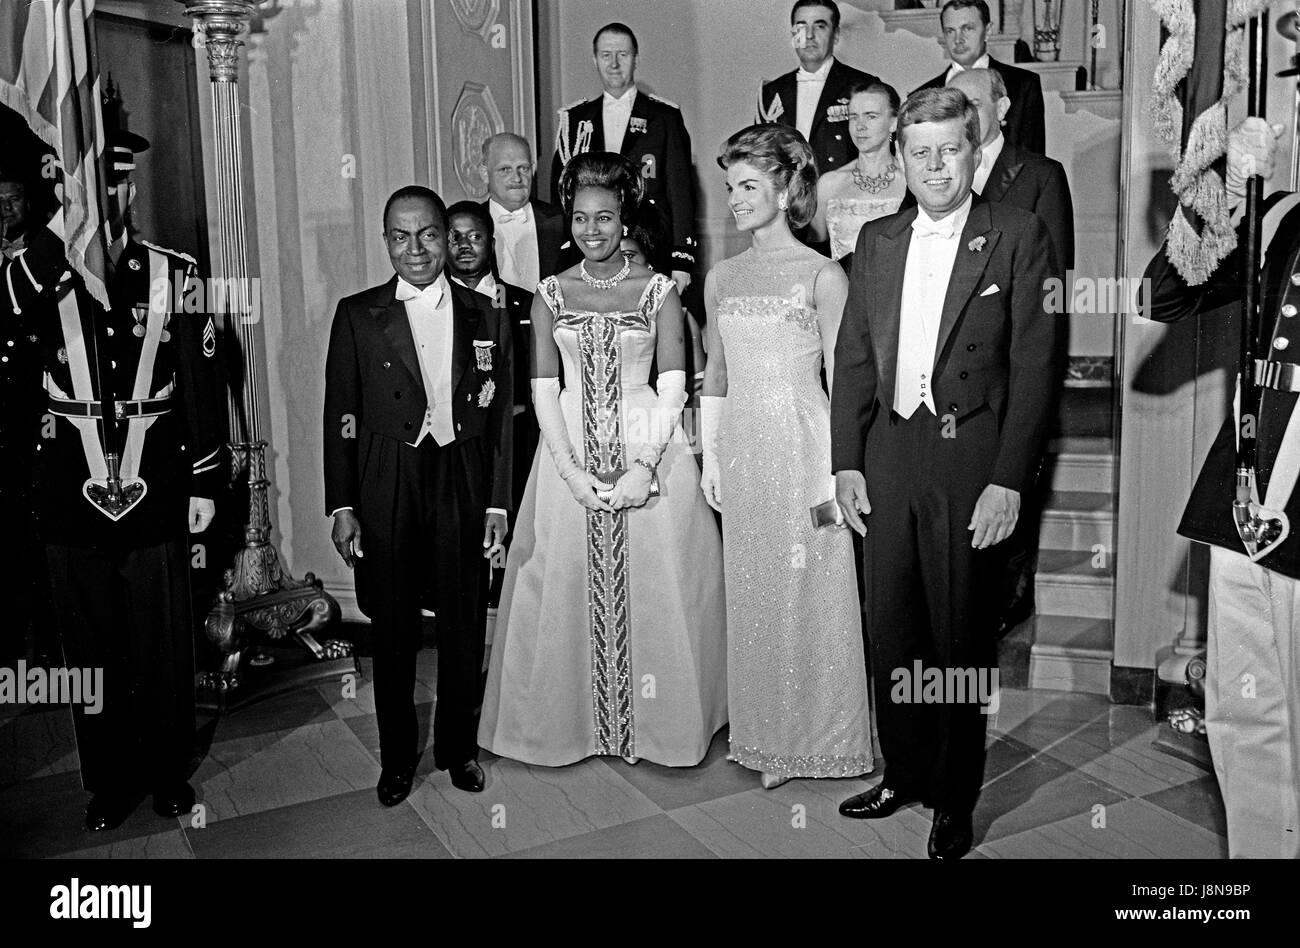 United States President John F. Kennedy and First Lady Jacqueline Kennedy stand in front of the Grand Staircase of the White House in Washington, DC prior to a dinner in honor of President of the Ivory Coast, Félix Houphouët-Boigny, and First Lady of the Ivory Coast, Marie-Thérèse Houphouët-Boigny on May 22, 1962. Front row (L-R): President Houphouët-Boigny; Mrs. Houphouët-Boigny; Mrs. Kennedy; President Kennedy. Others (L-R): Ambassador of the Ivory Coast, Henri Konan Bédié; U.S. Ambassador to the Ivory Coast, R. Borden Reams; Military Aide to President Kennedy, General Chester V. Clifton; Ai Stock Photo